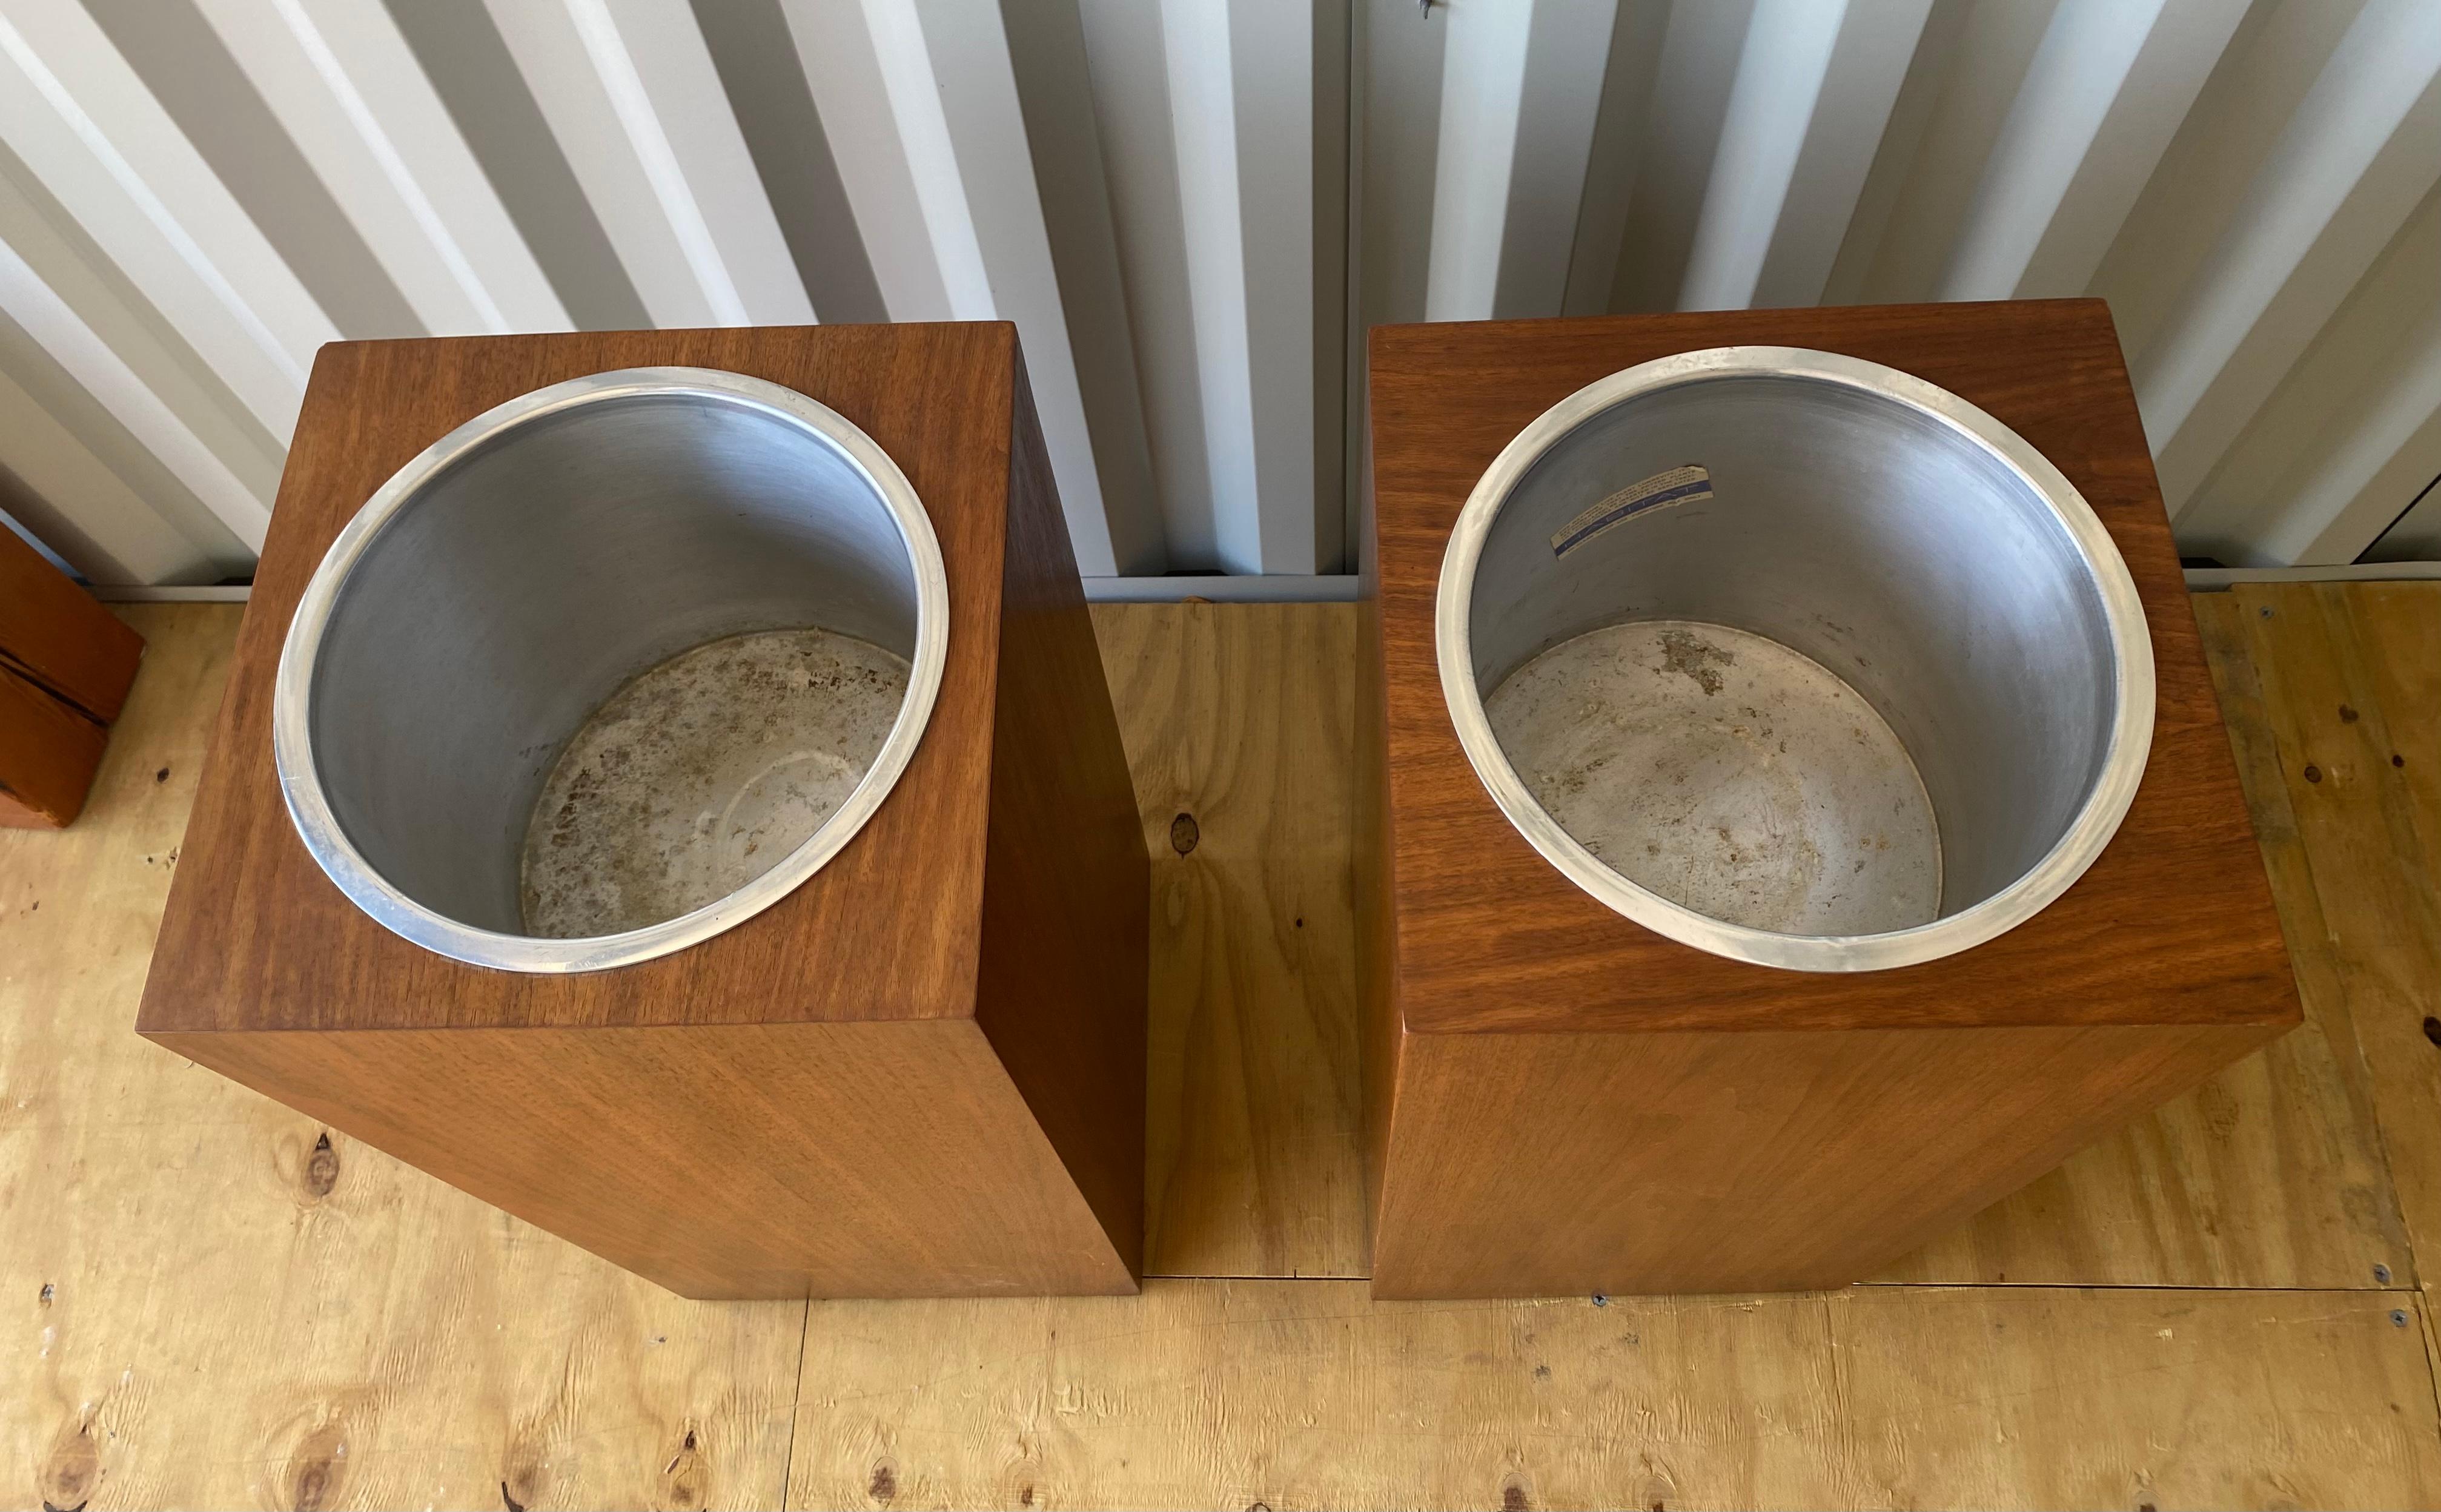 Modernist Walnut and Aluminum Architectural Planters by Habitat International,,, Stunning sleek, simple ,classic design,Fit seamlessly into any modern, contemporary, environment.Priced separately but would be amazing used as a pair.